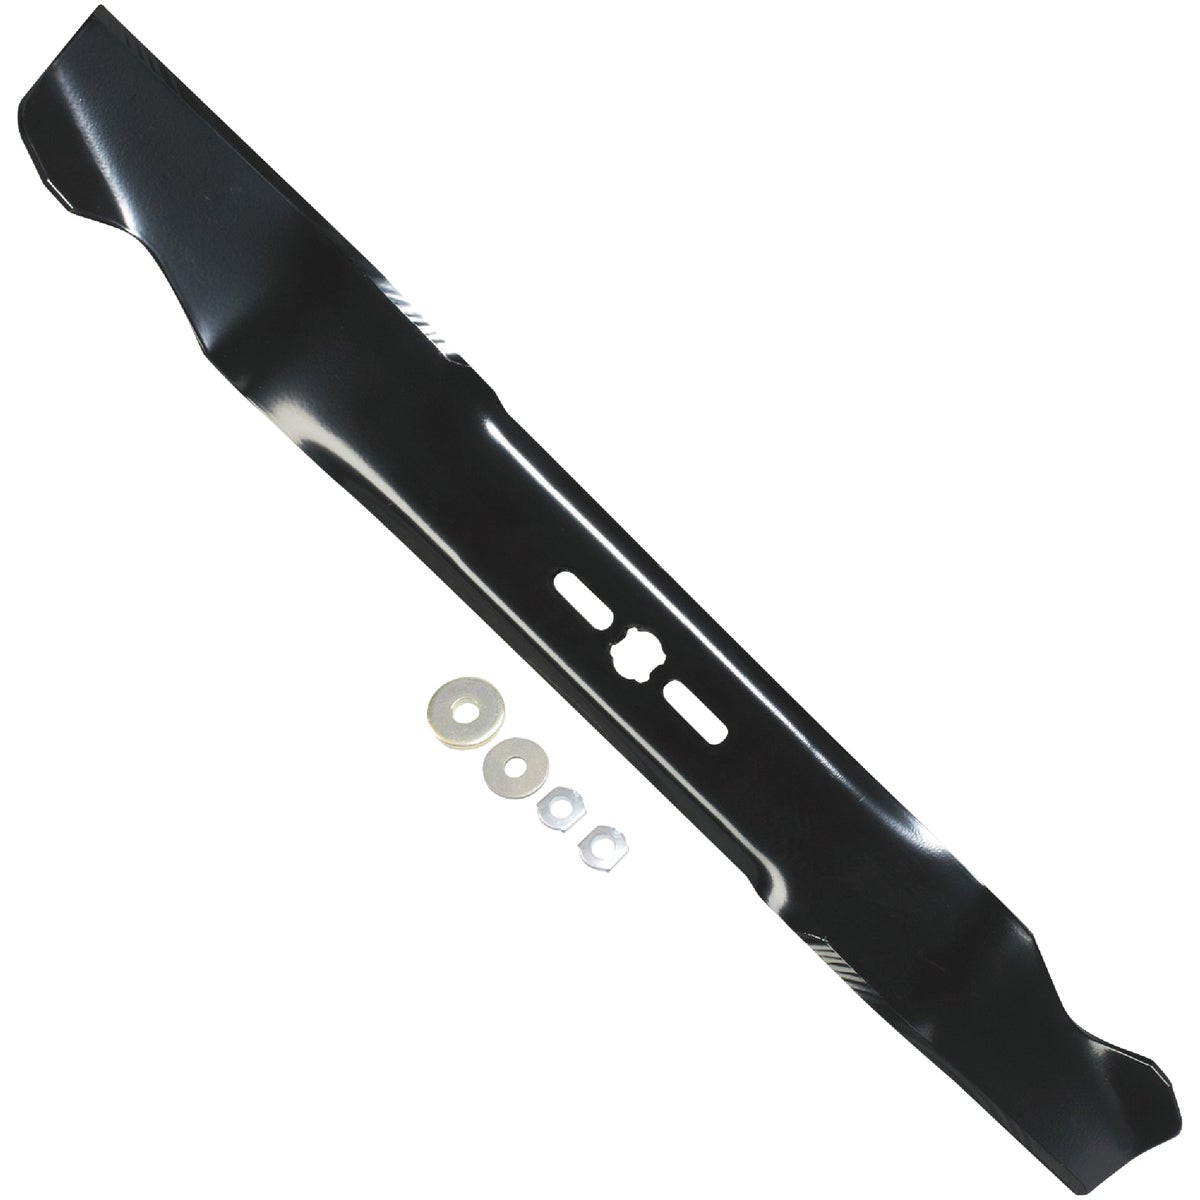 Arnold 490-100-0081 Arnold 21 In. 3-1 Universal Mulching Mower Blade with Adapter 490-100-0081